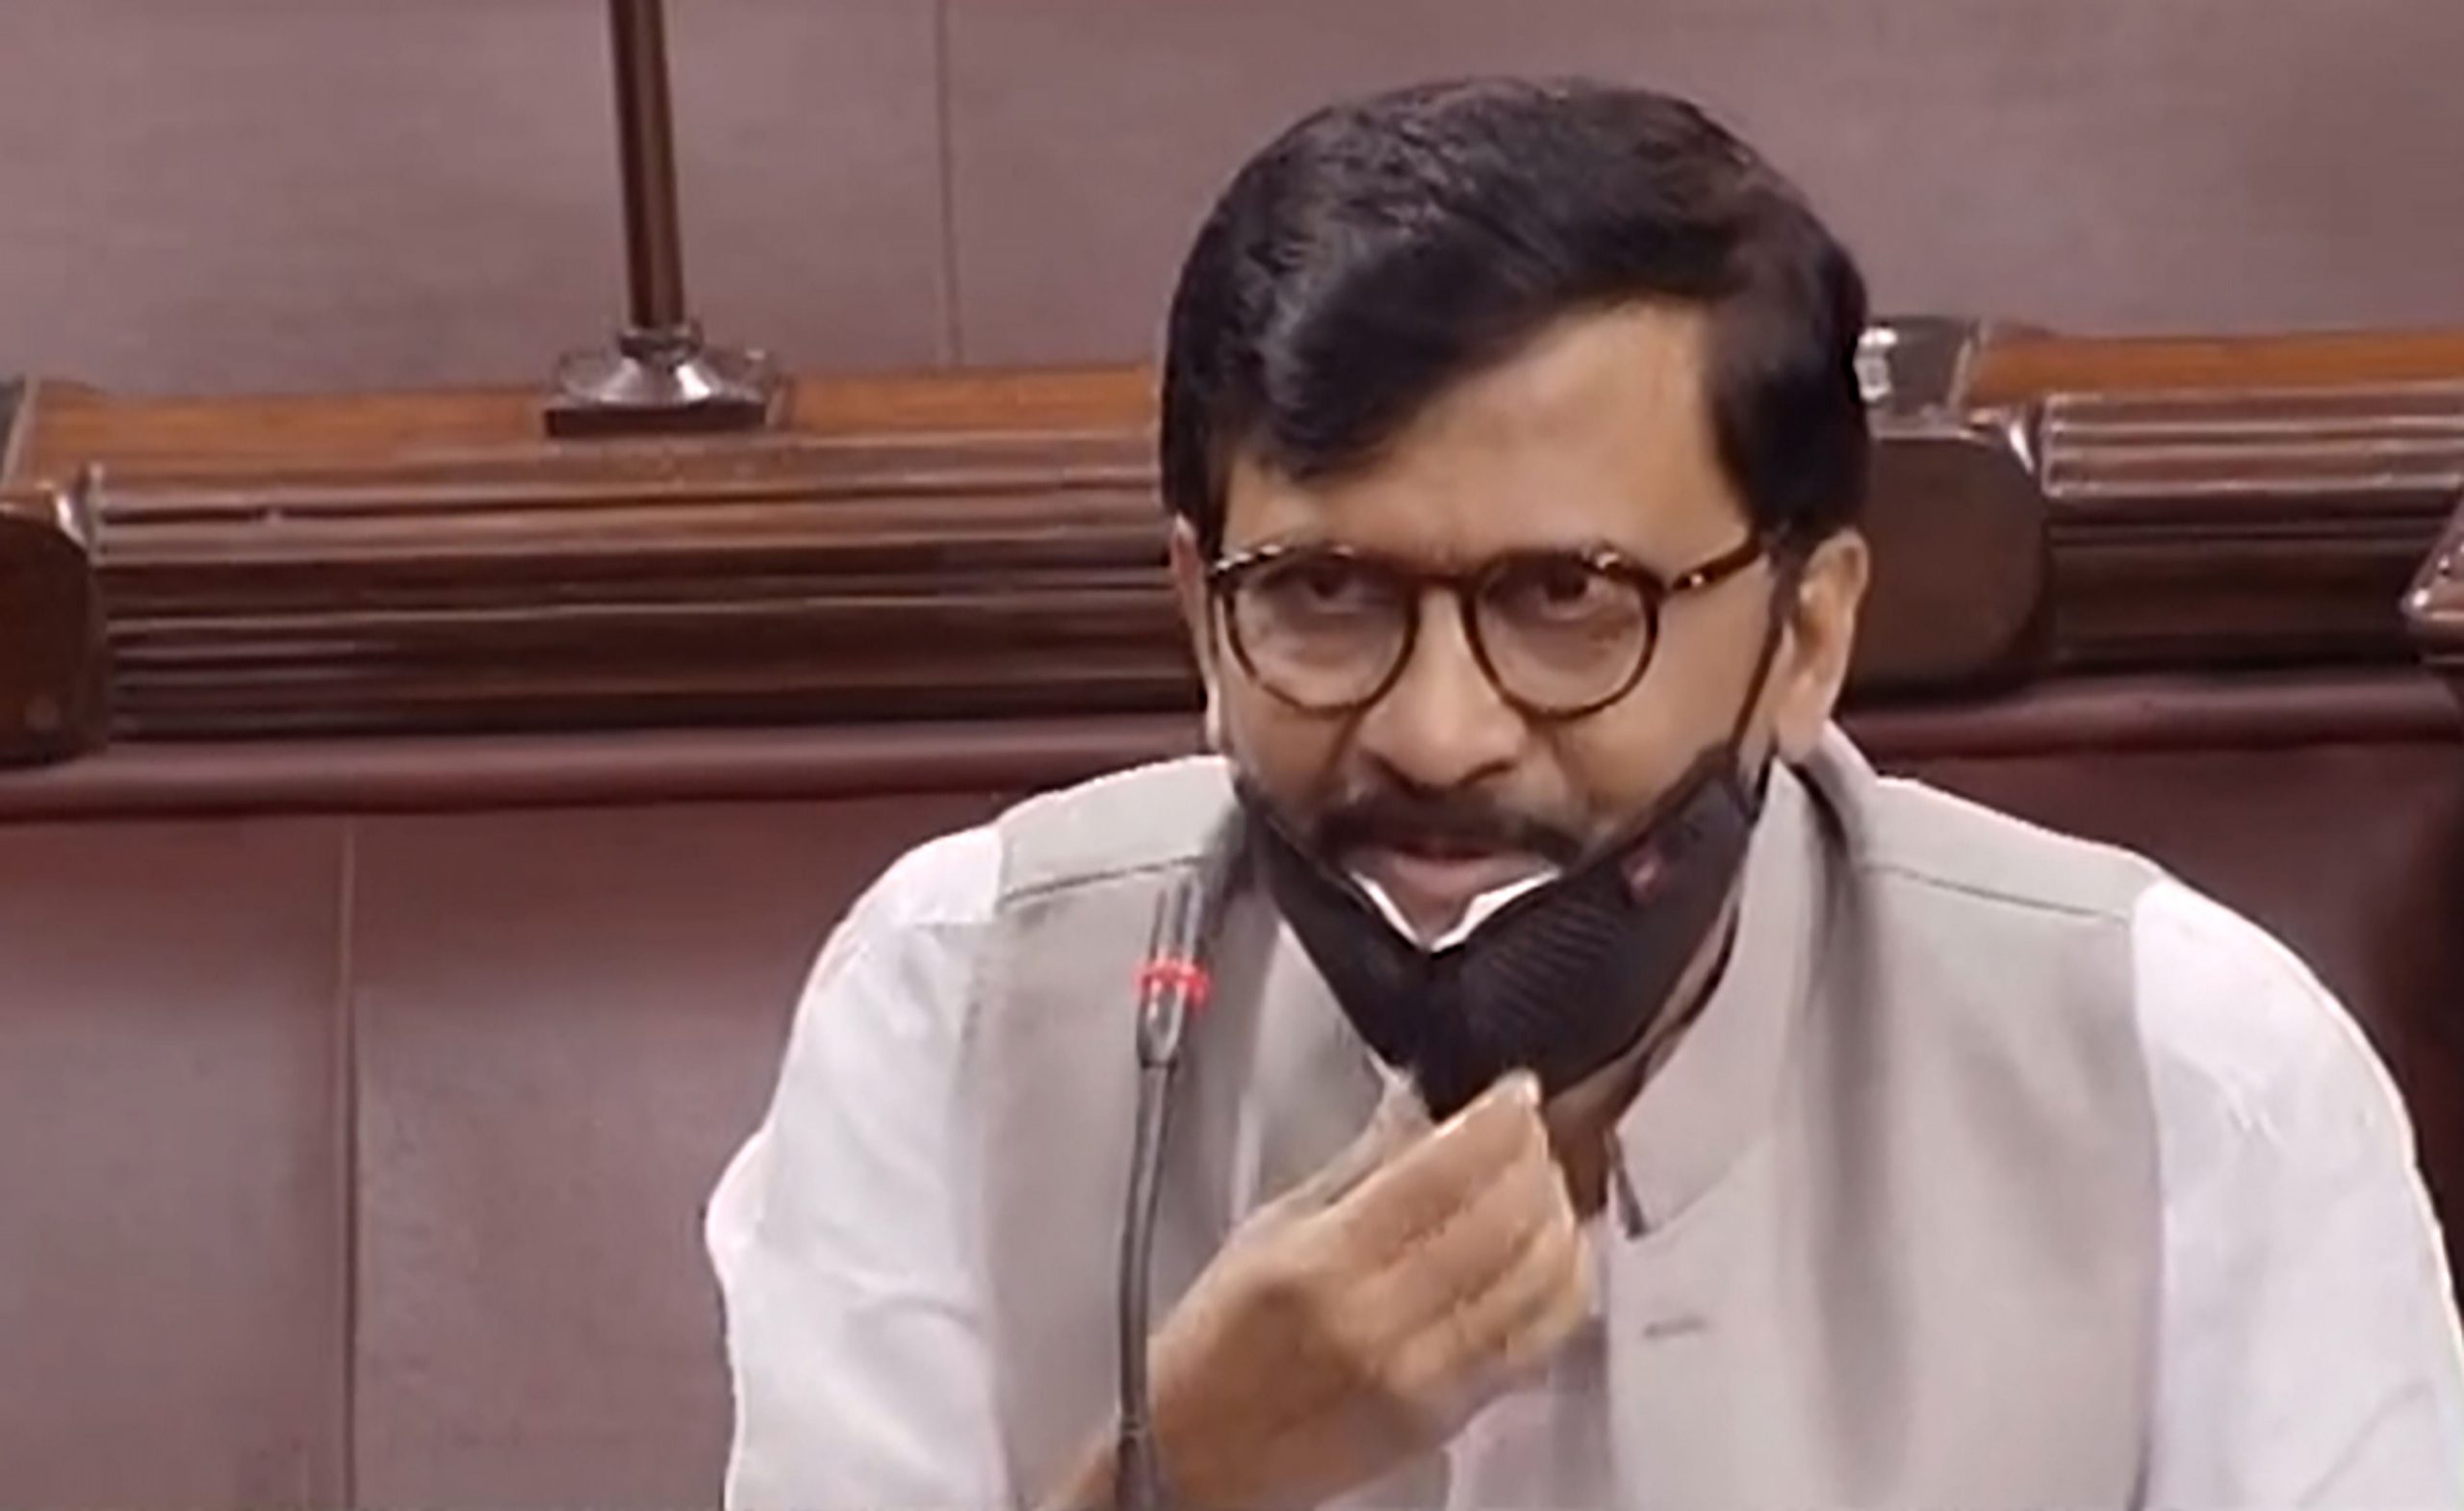 Did people recover from COVID-19 by eating ‘bhabhiji ke papad’? asks Sanjay Raut